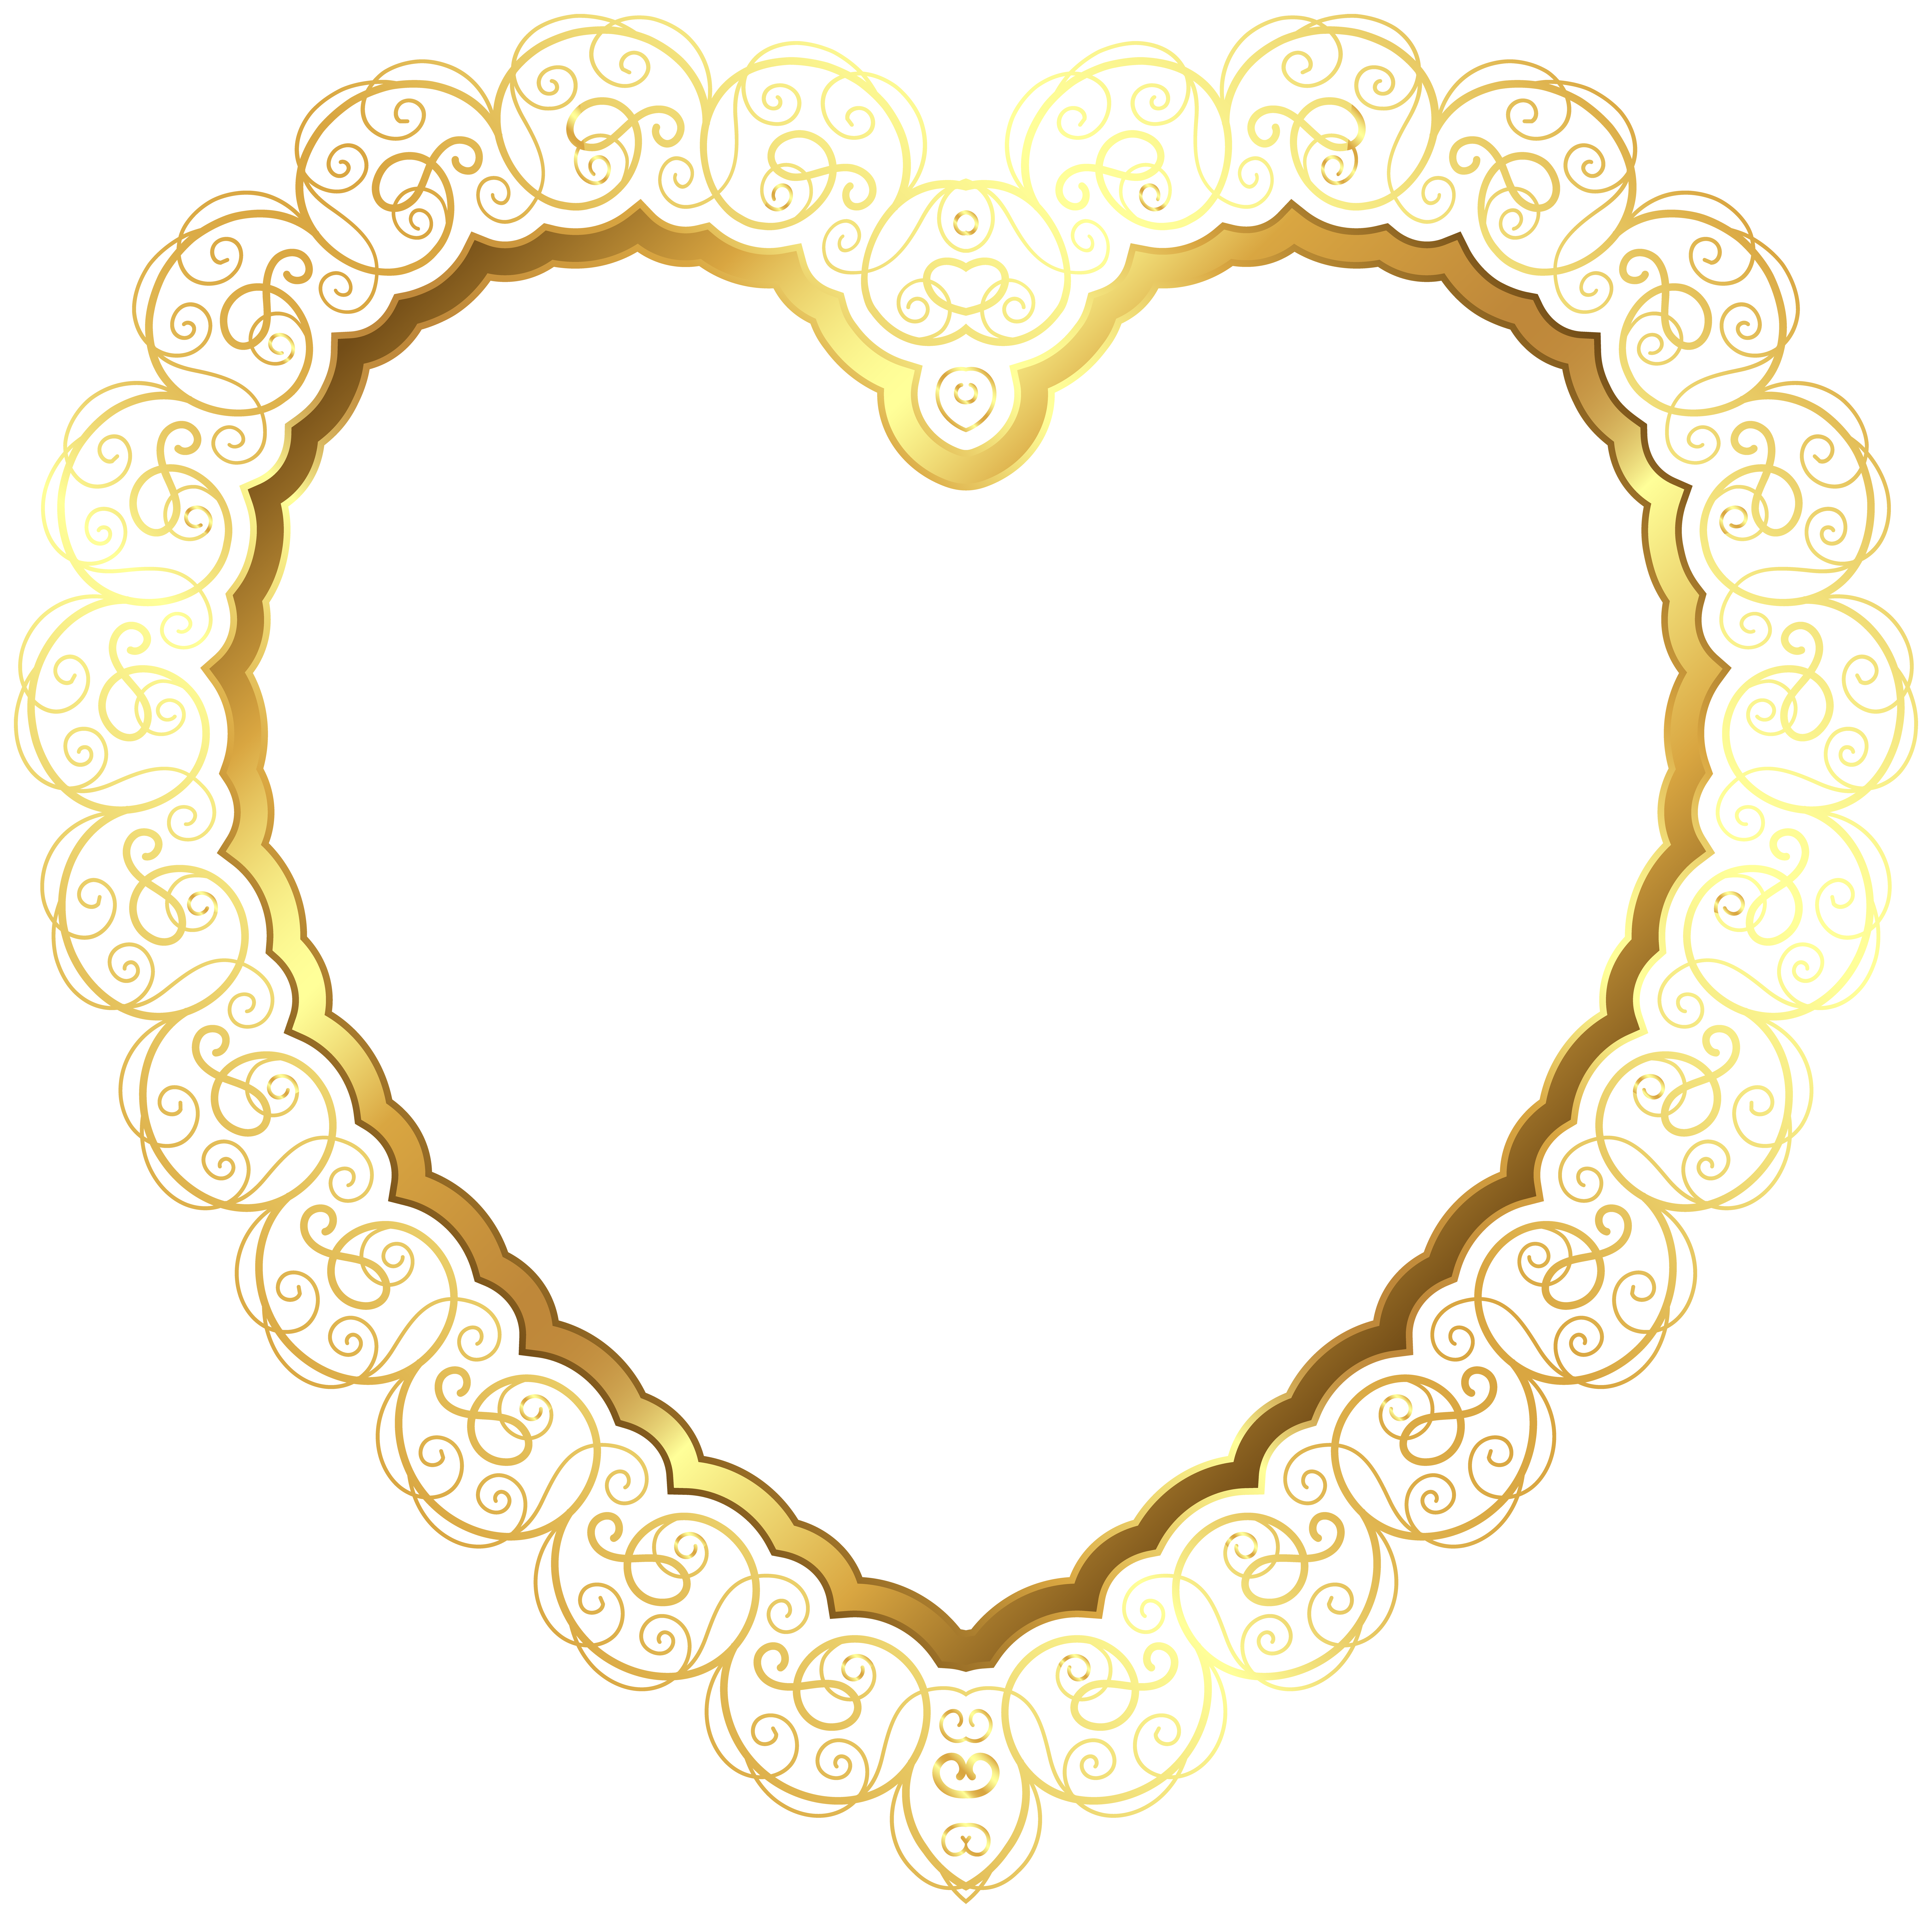 Heart Border Transparent Png Clip Art Gallery Yopriceville High Quality Images And Transparent Png Free Clipart